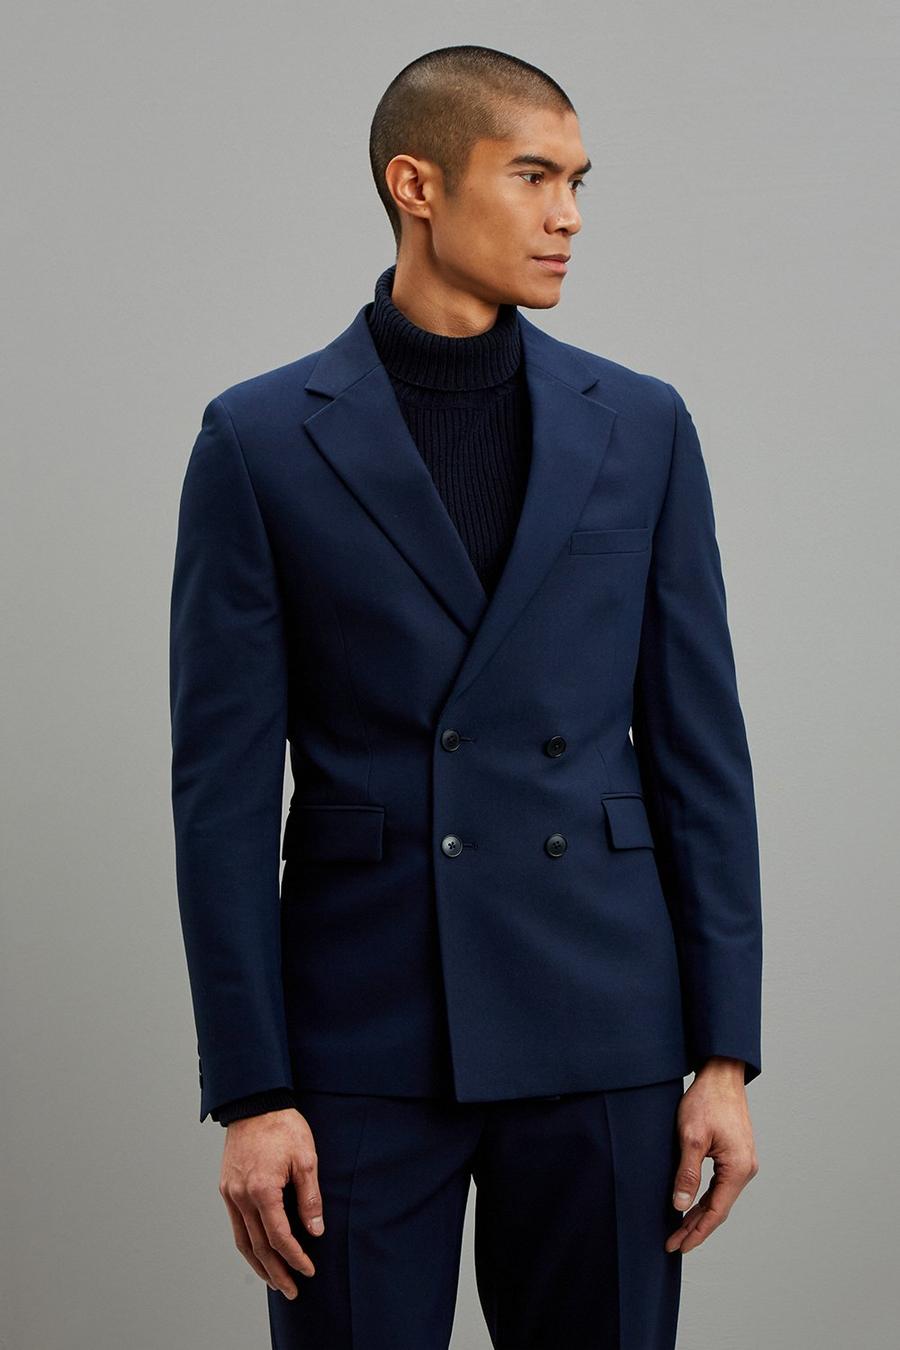 Super Skinny Fit Navy Double Breasted  Suit Jacket